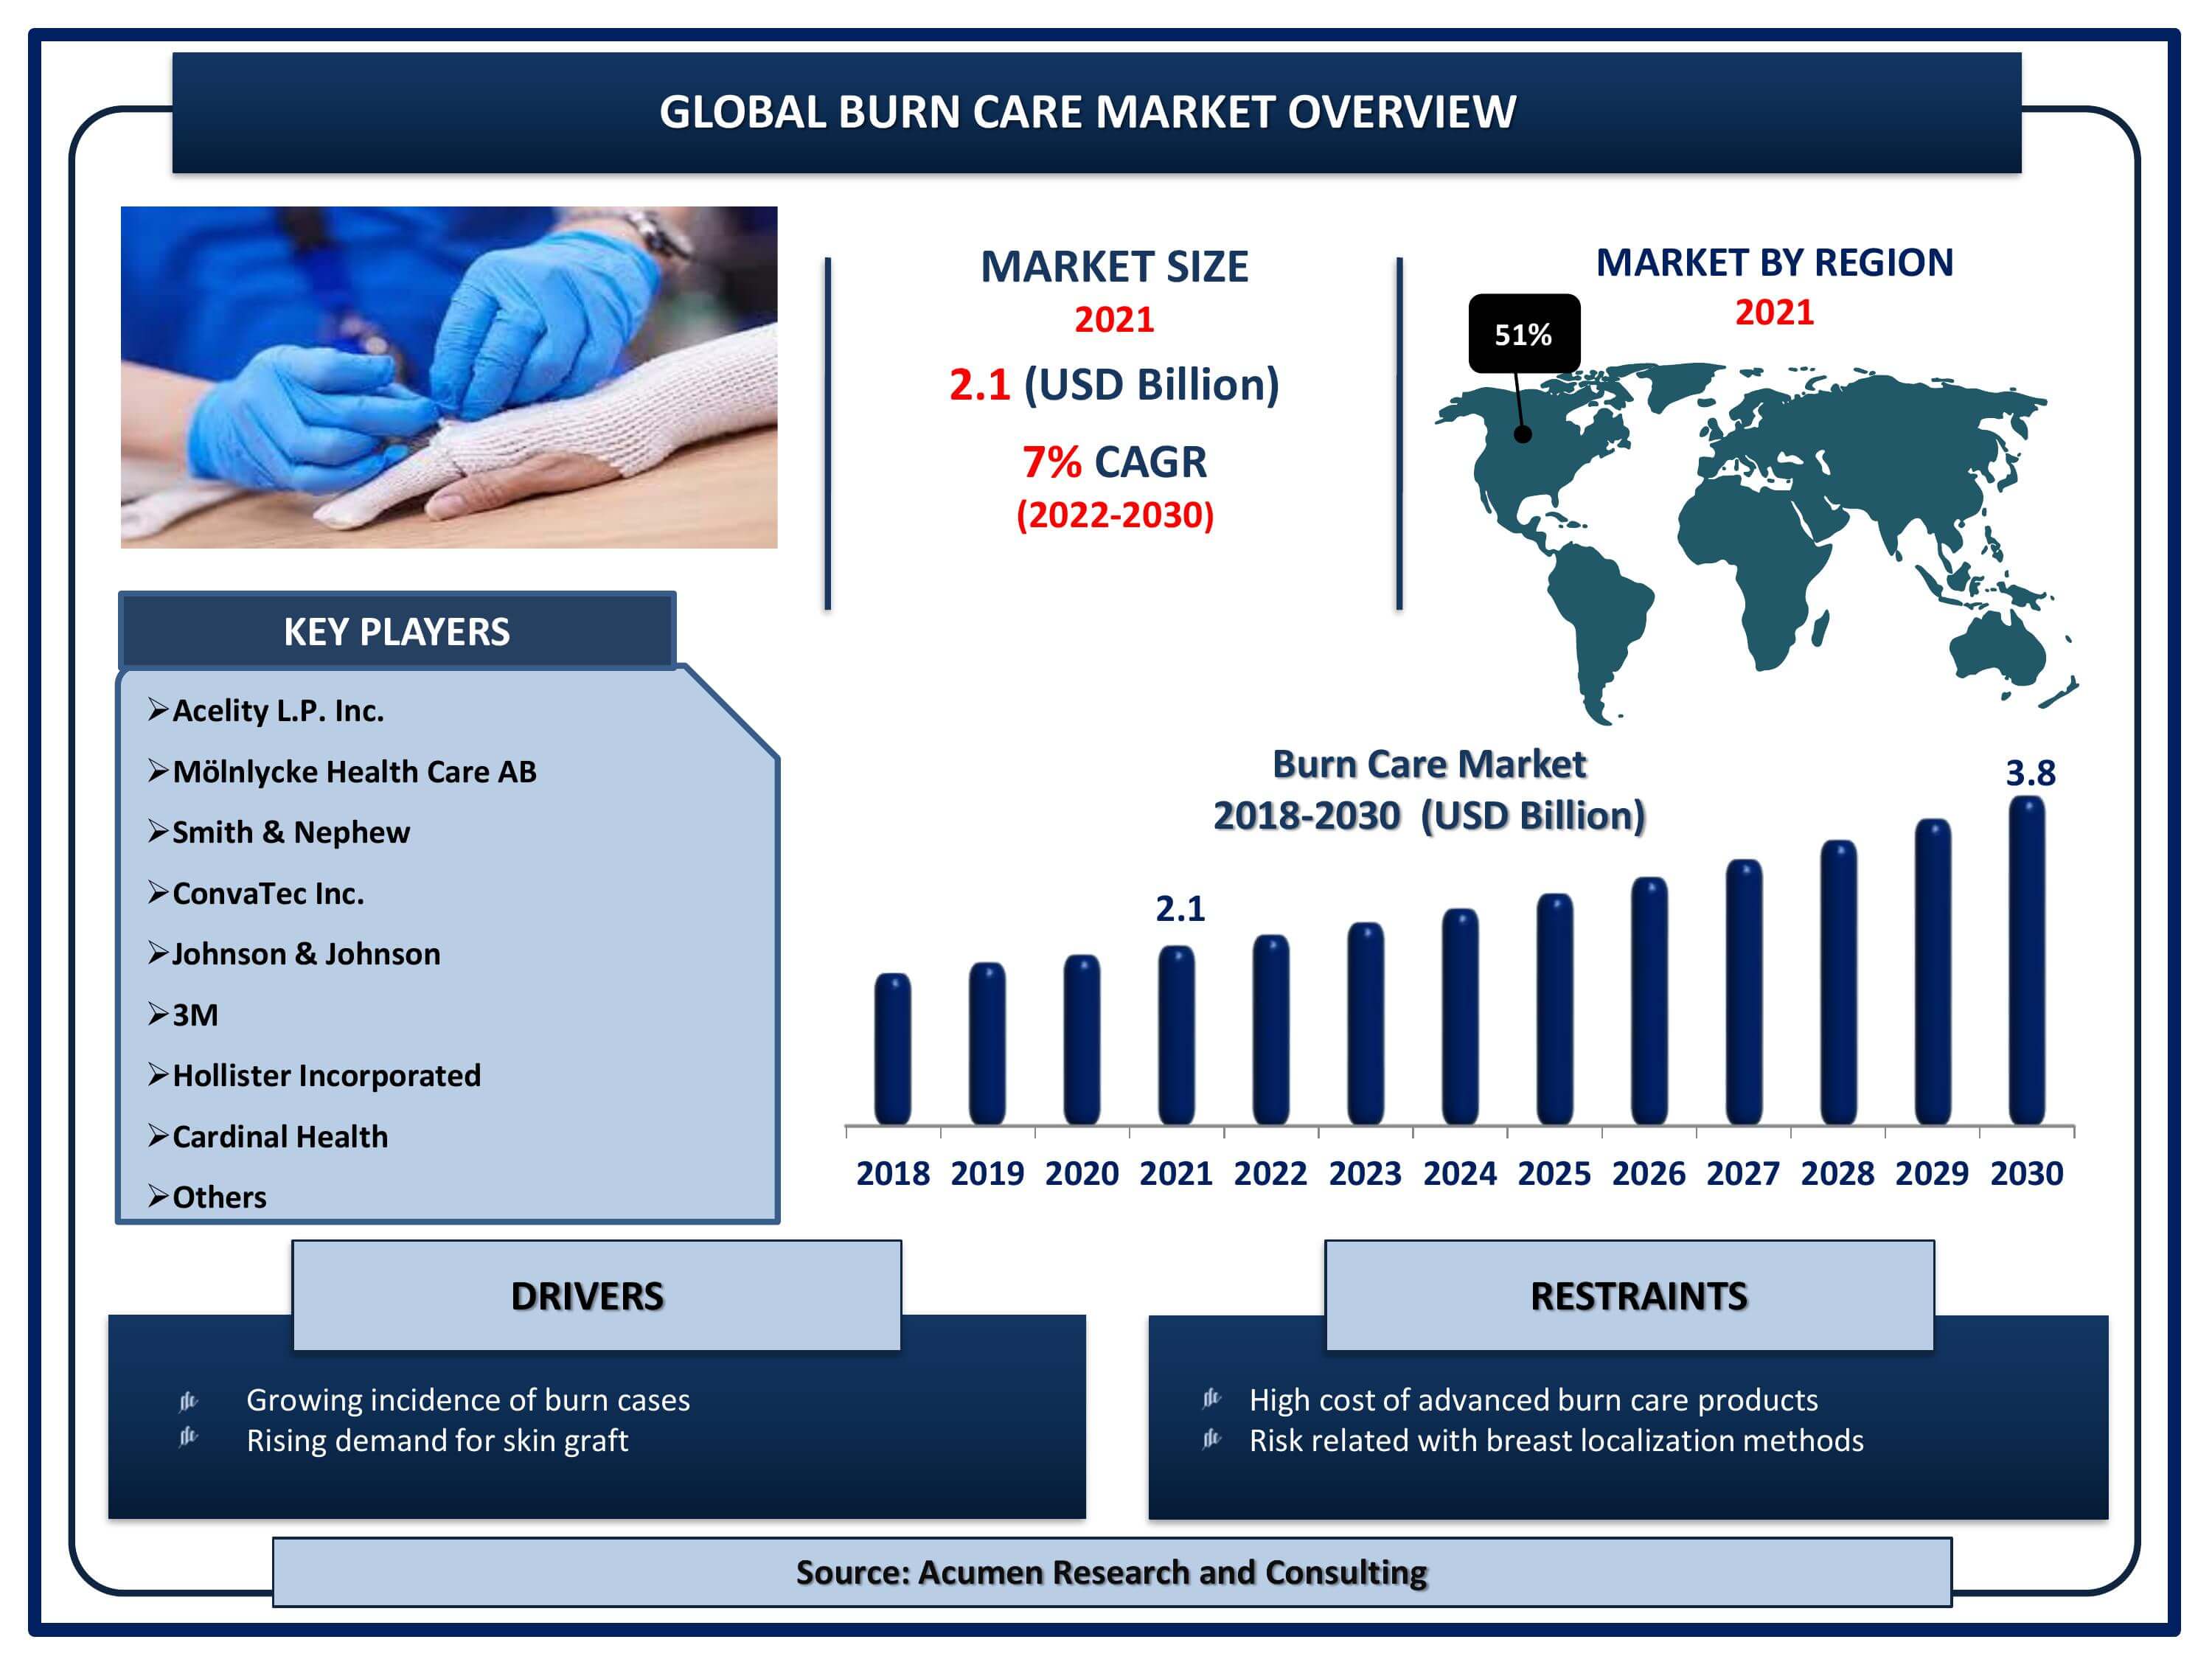 Global burn care market revenue is estimated to reach USD 3.8 Billion by 2030 with a CAGR of 7% from 2022 to 2030